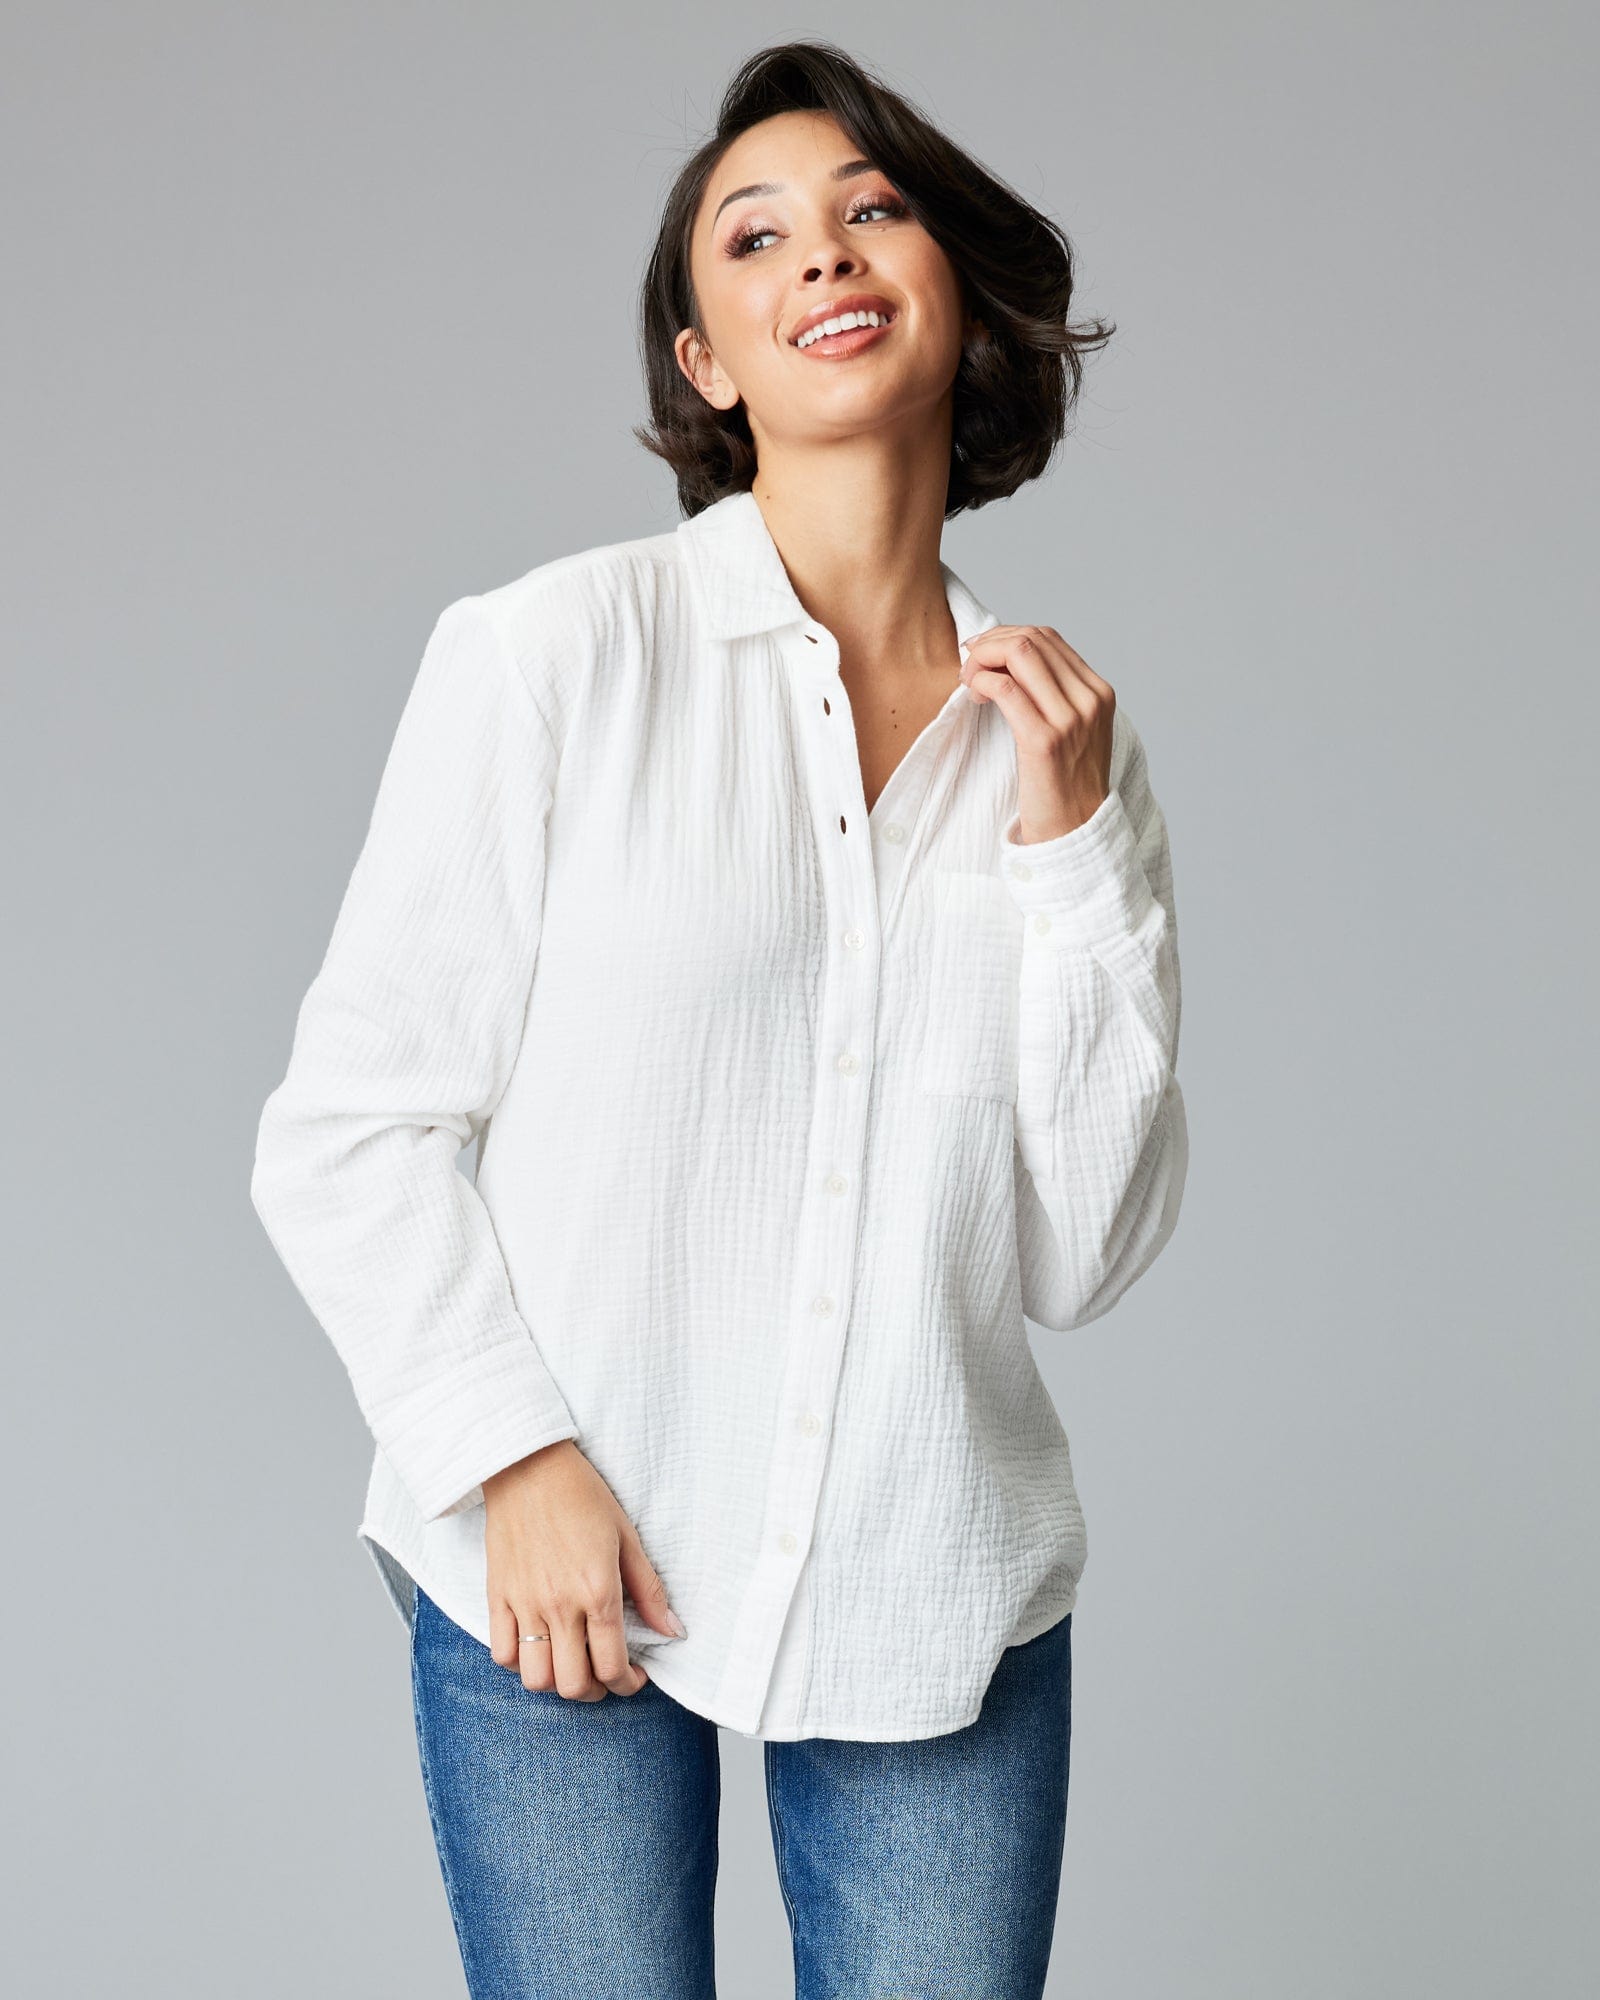 Woman in a long sleeve, white, button-down top.